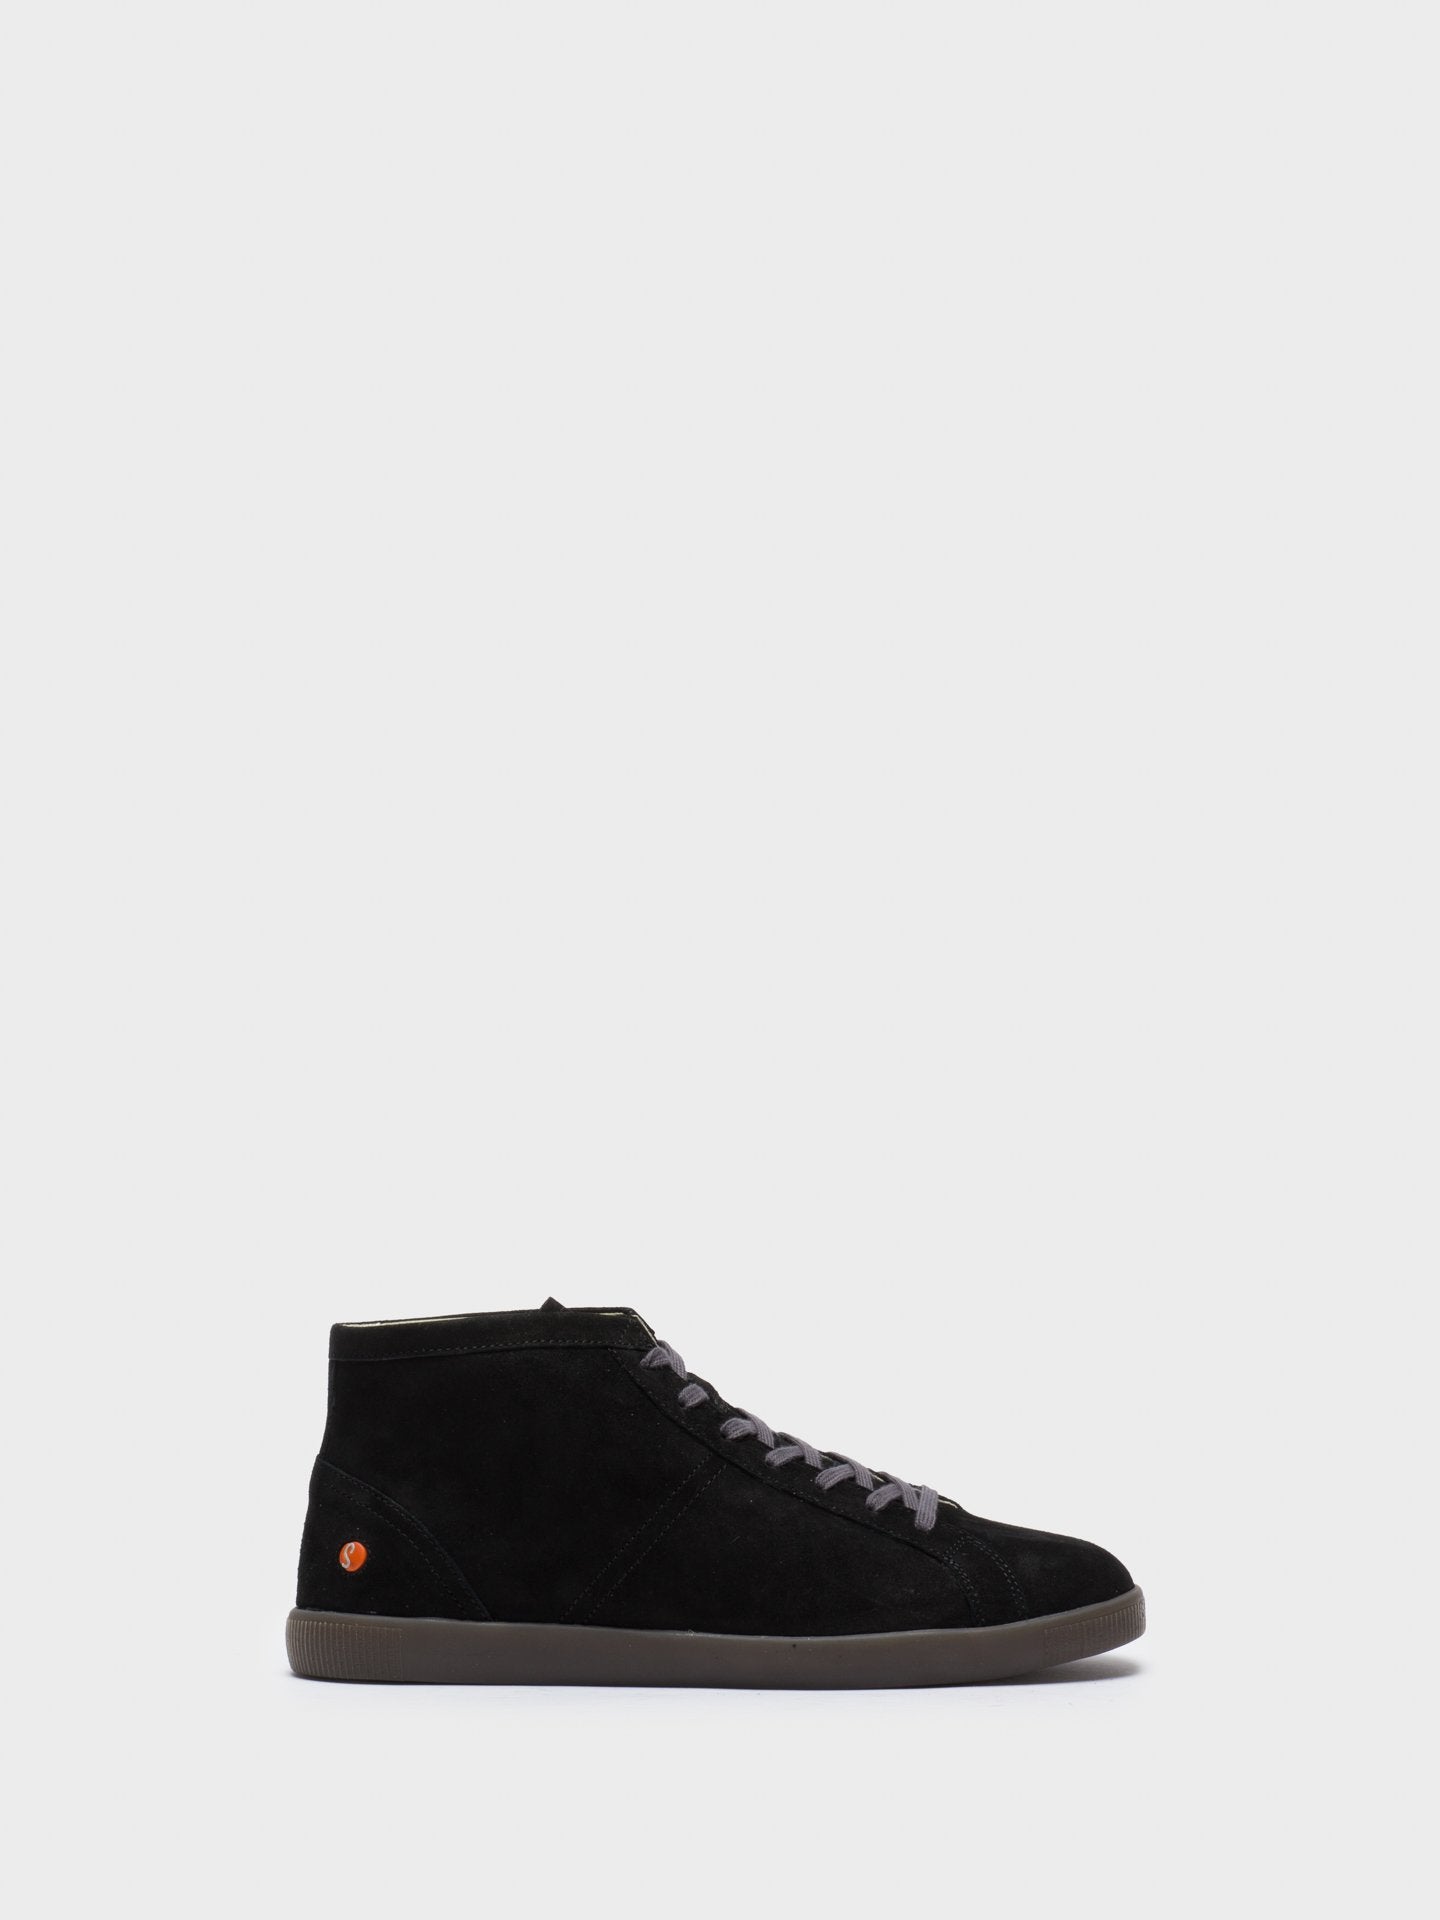 Softinos Black Leather Hi-Top Trainers